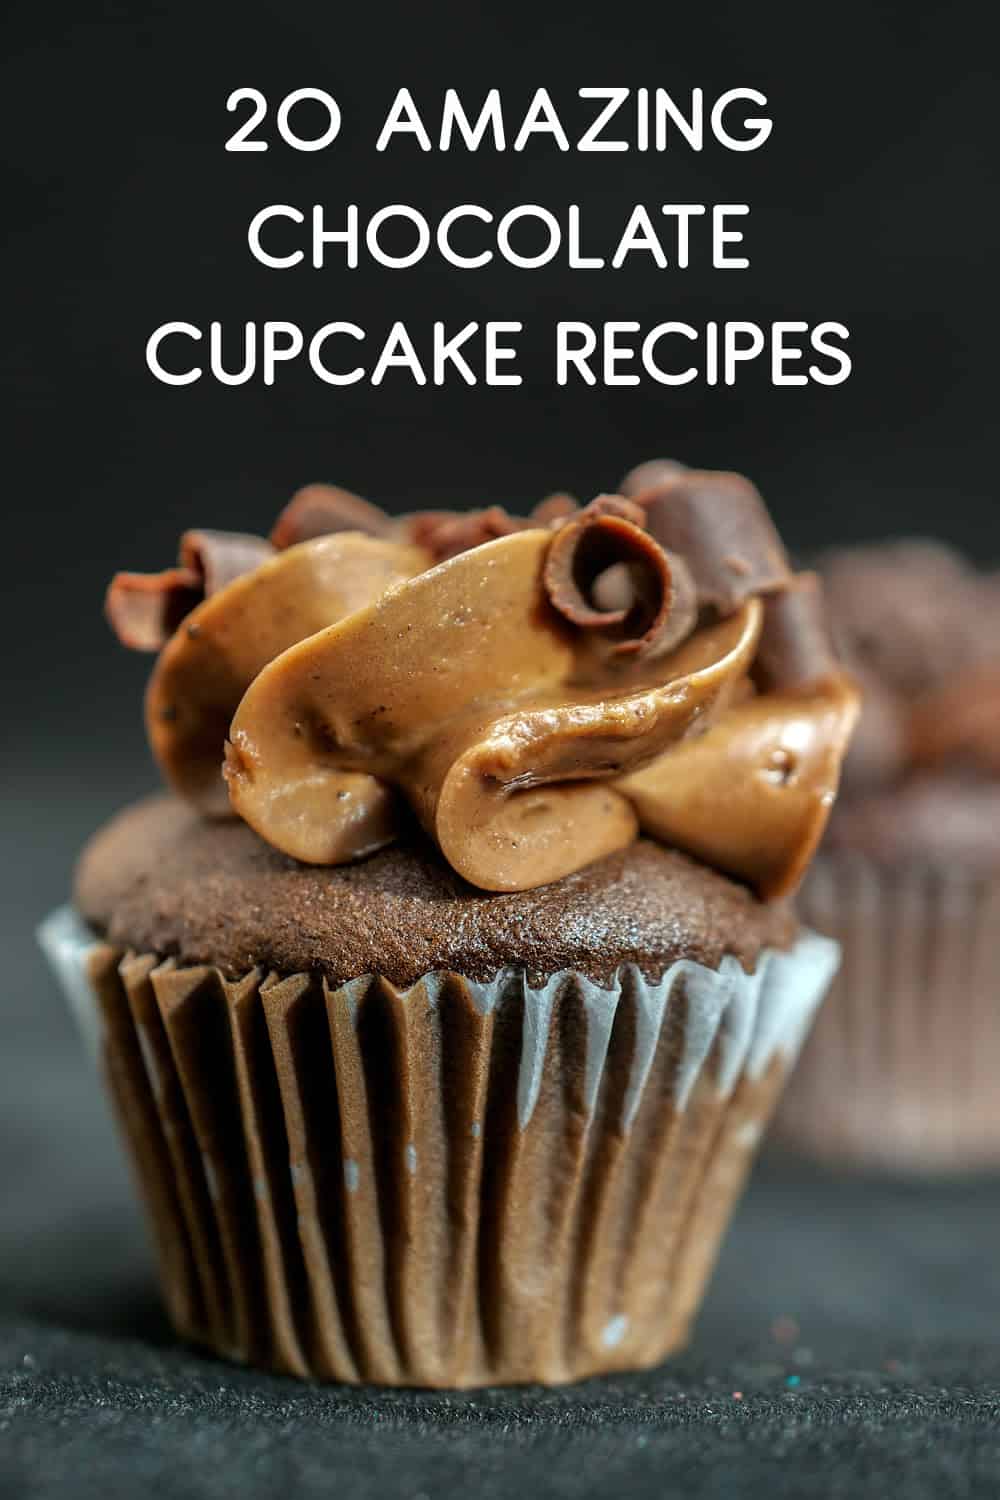 There are so many incredible chocolate cupcake recipes out there. This list of 20 is guaranteed to satisfy your cravings! Check them out!